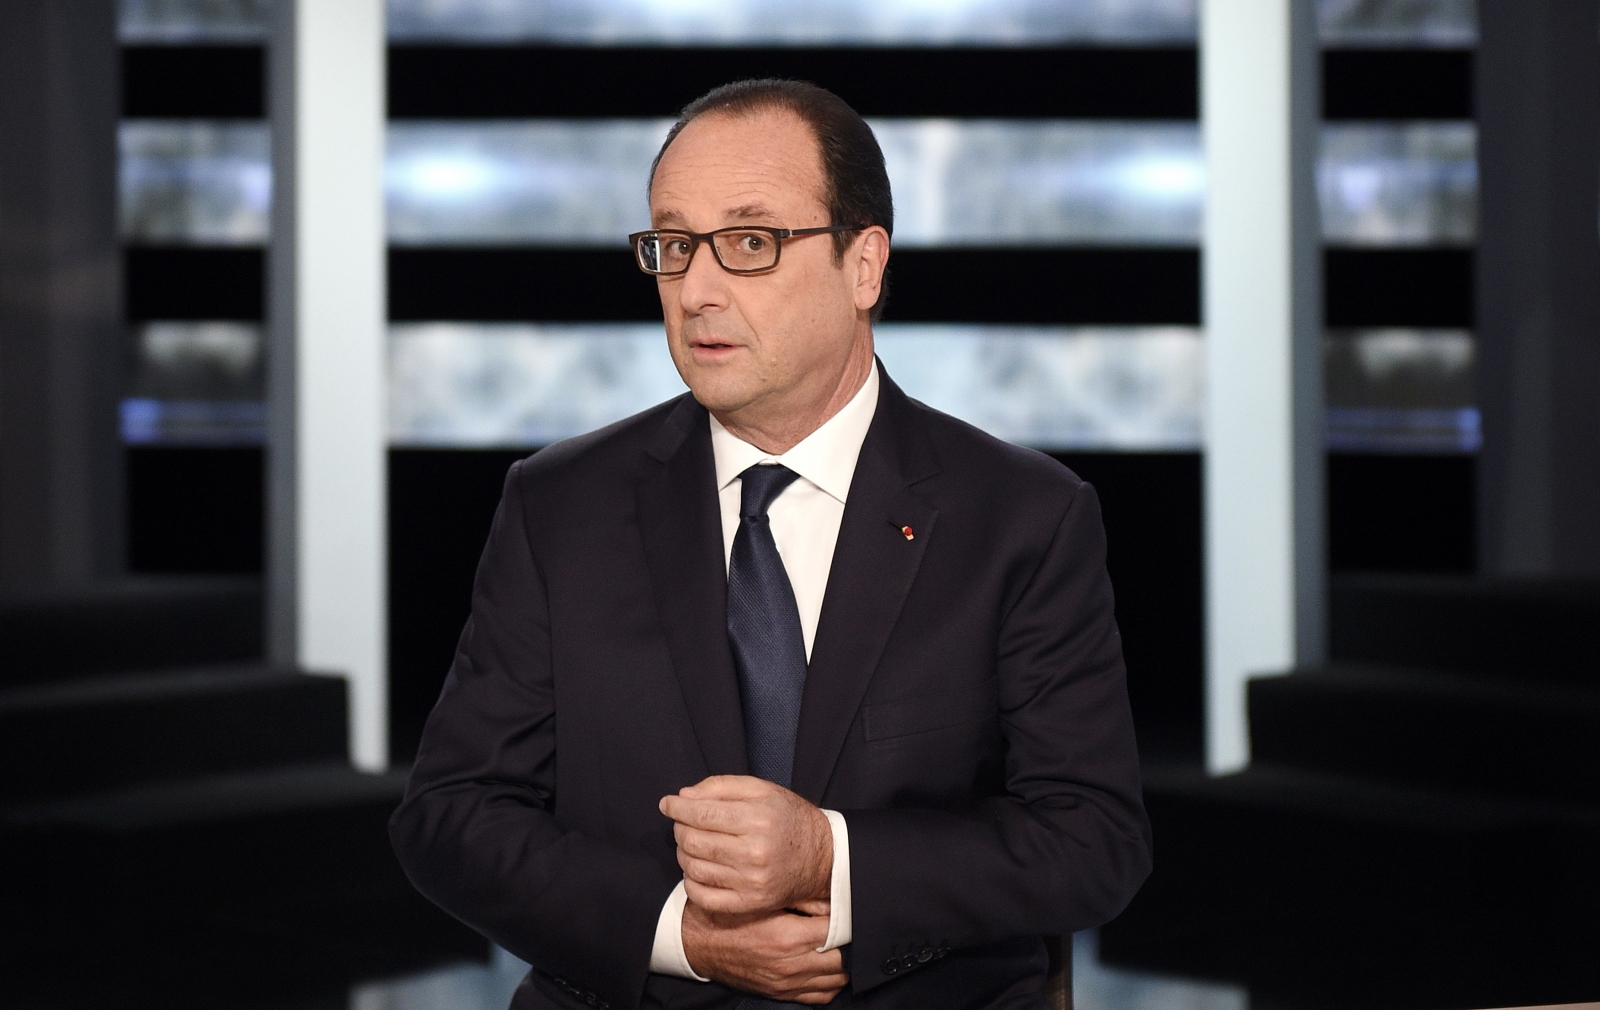 Frances President Francois Hollande poses before appearing on TF1 television prime time news live broadcast at their studios in Aubervilliers, near Paris, November 6, 2014